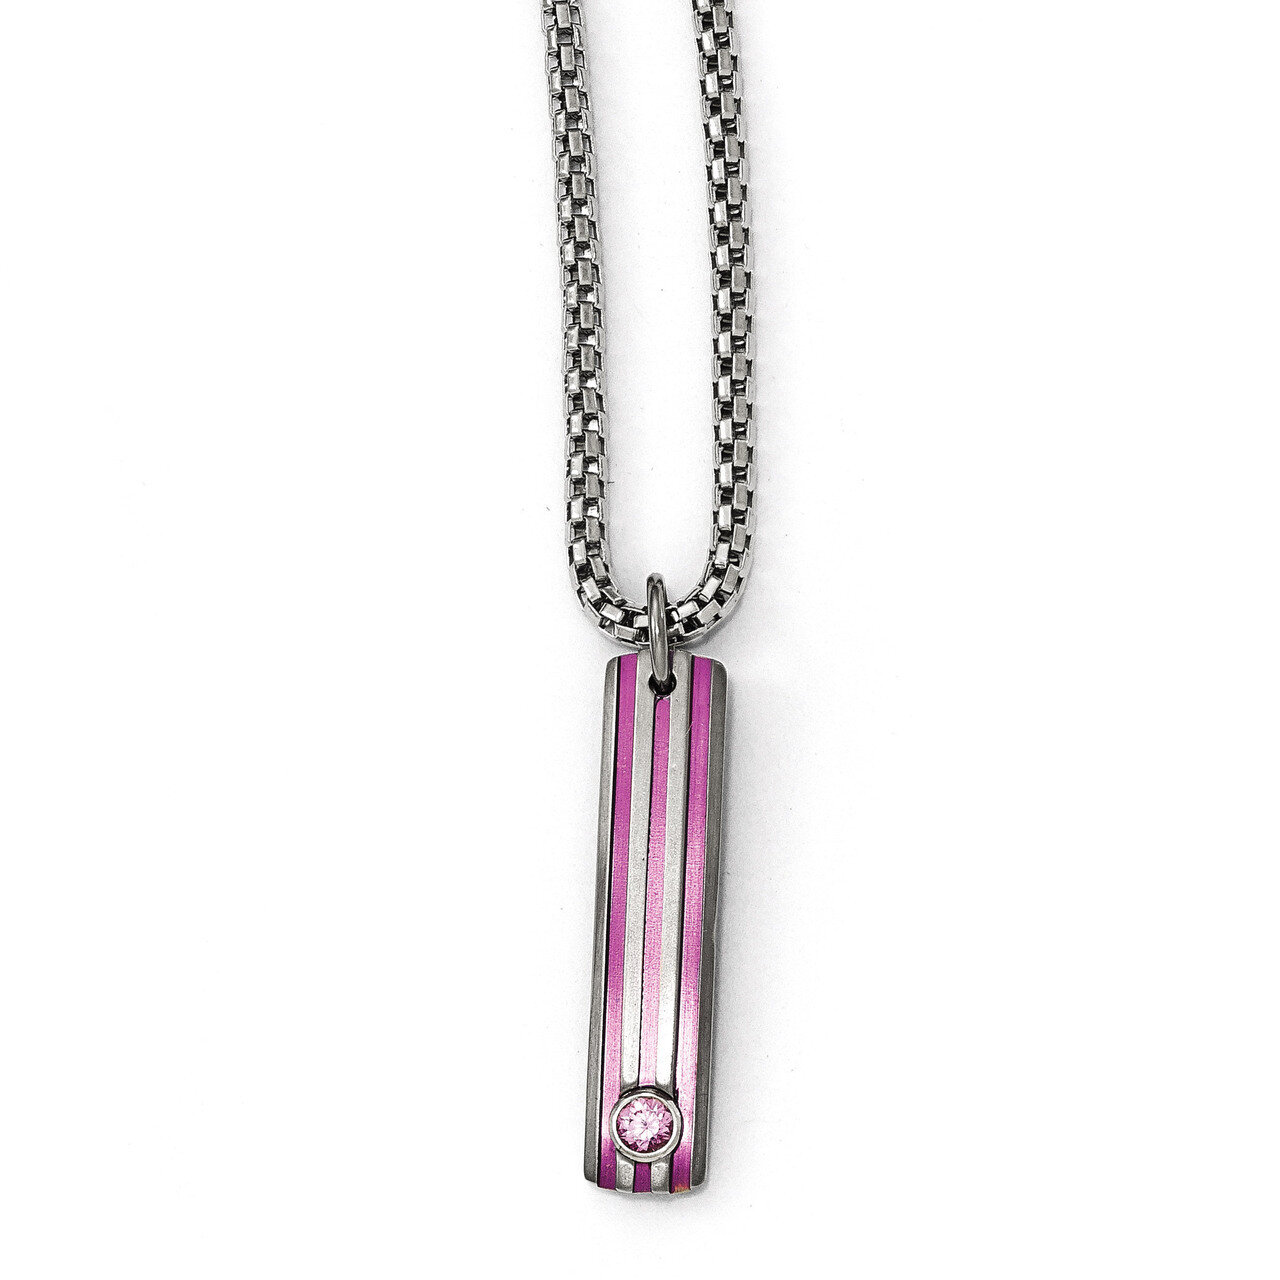 Edward Mirell Titanium Grooved Anodized & Pink Sapphire 2 Inch Extension Necklace EMN153-16